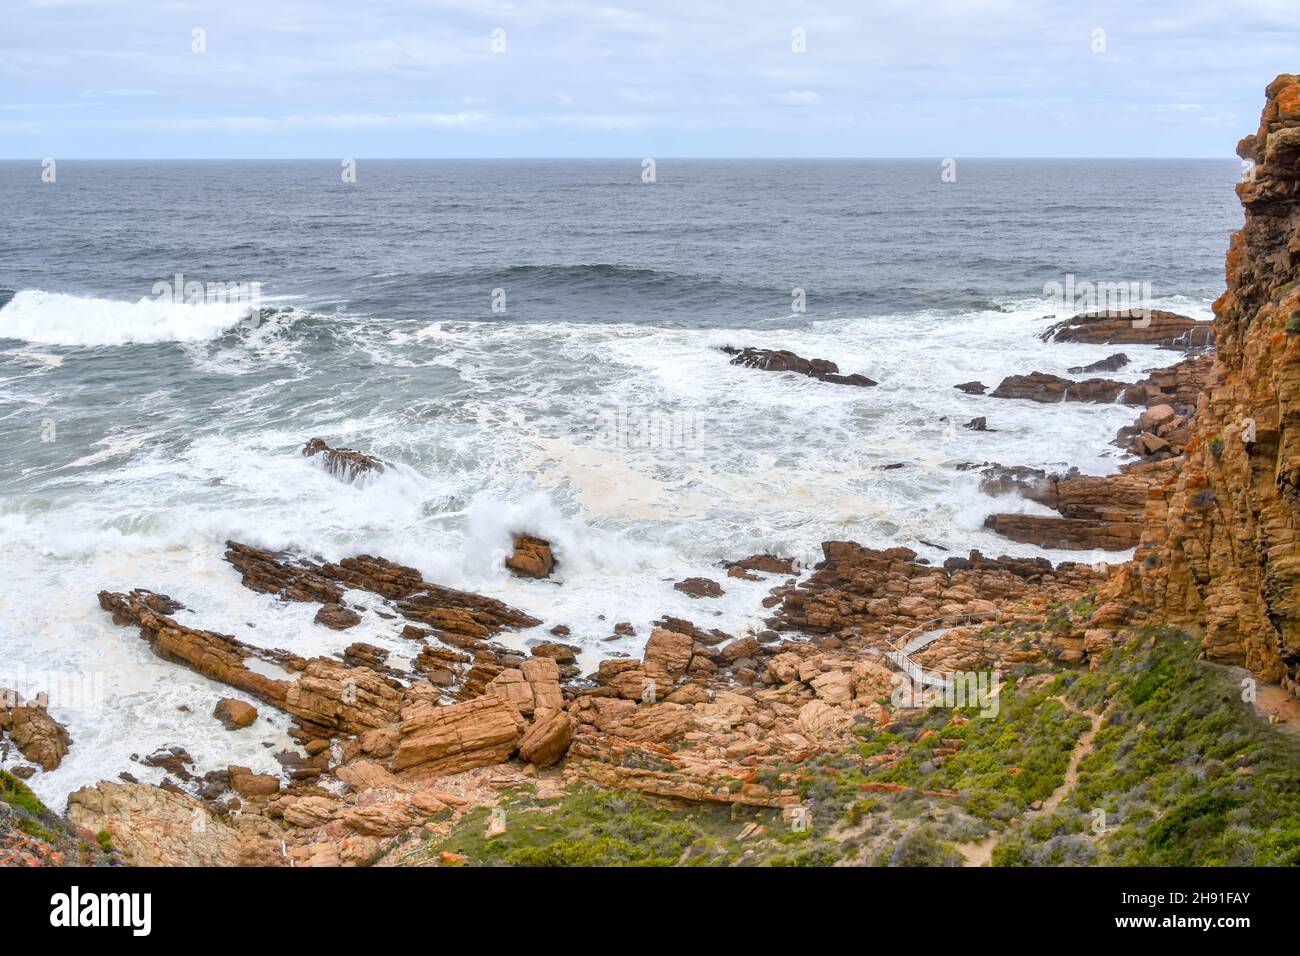 The Indian Ocean seen from the Point of Human Origins near Mosselbay on the Garden Route in South Africa with rock formations and waves in an area kno Stock Photo